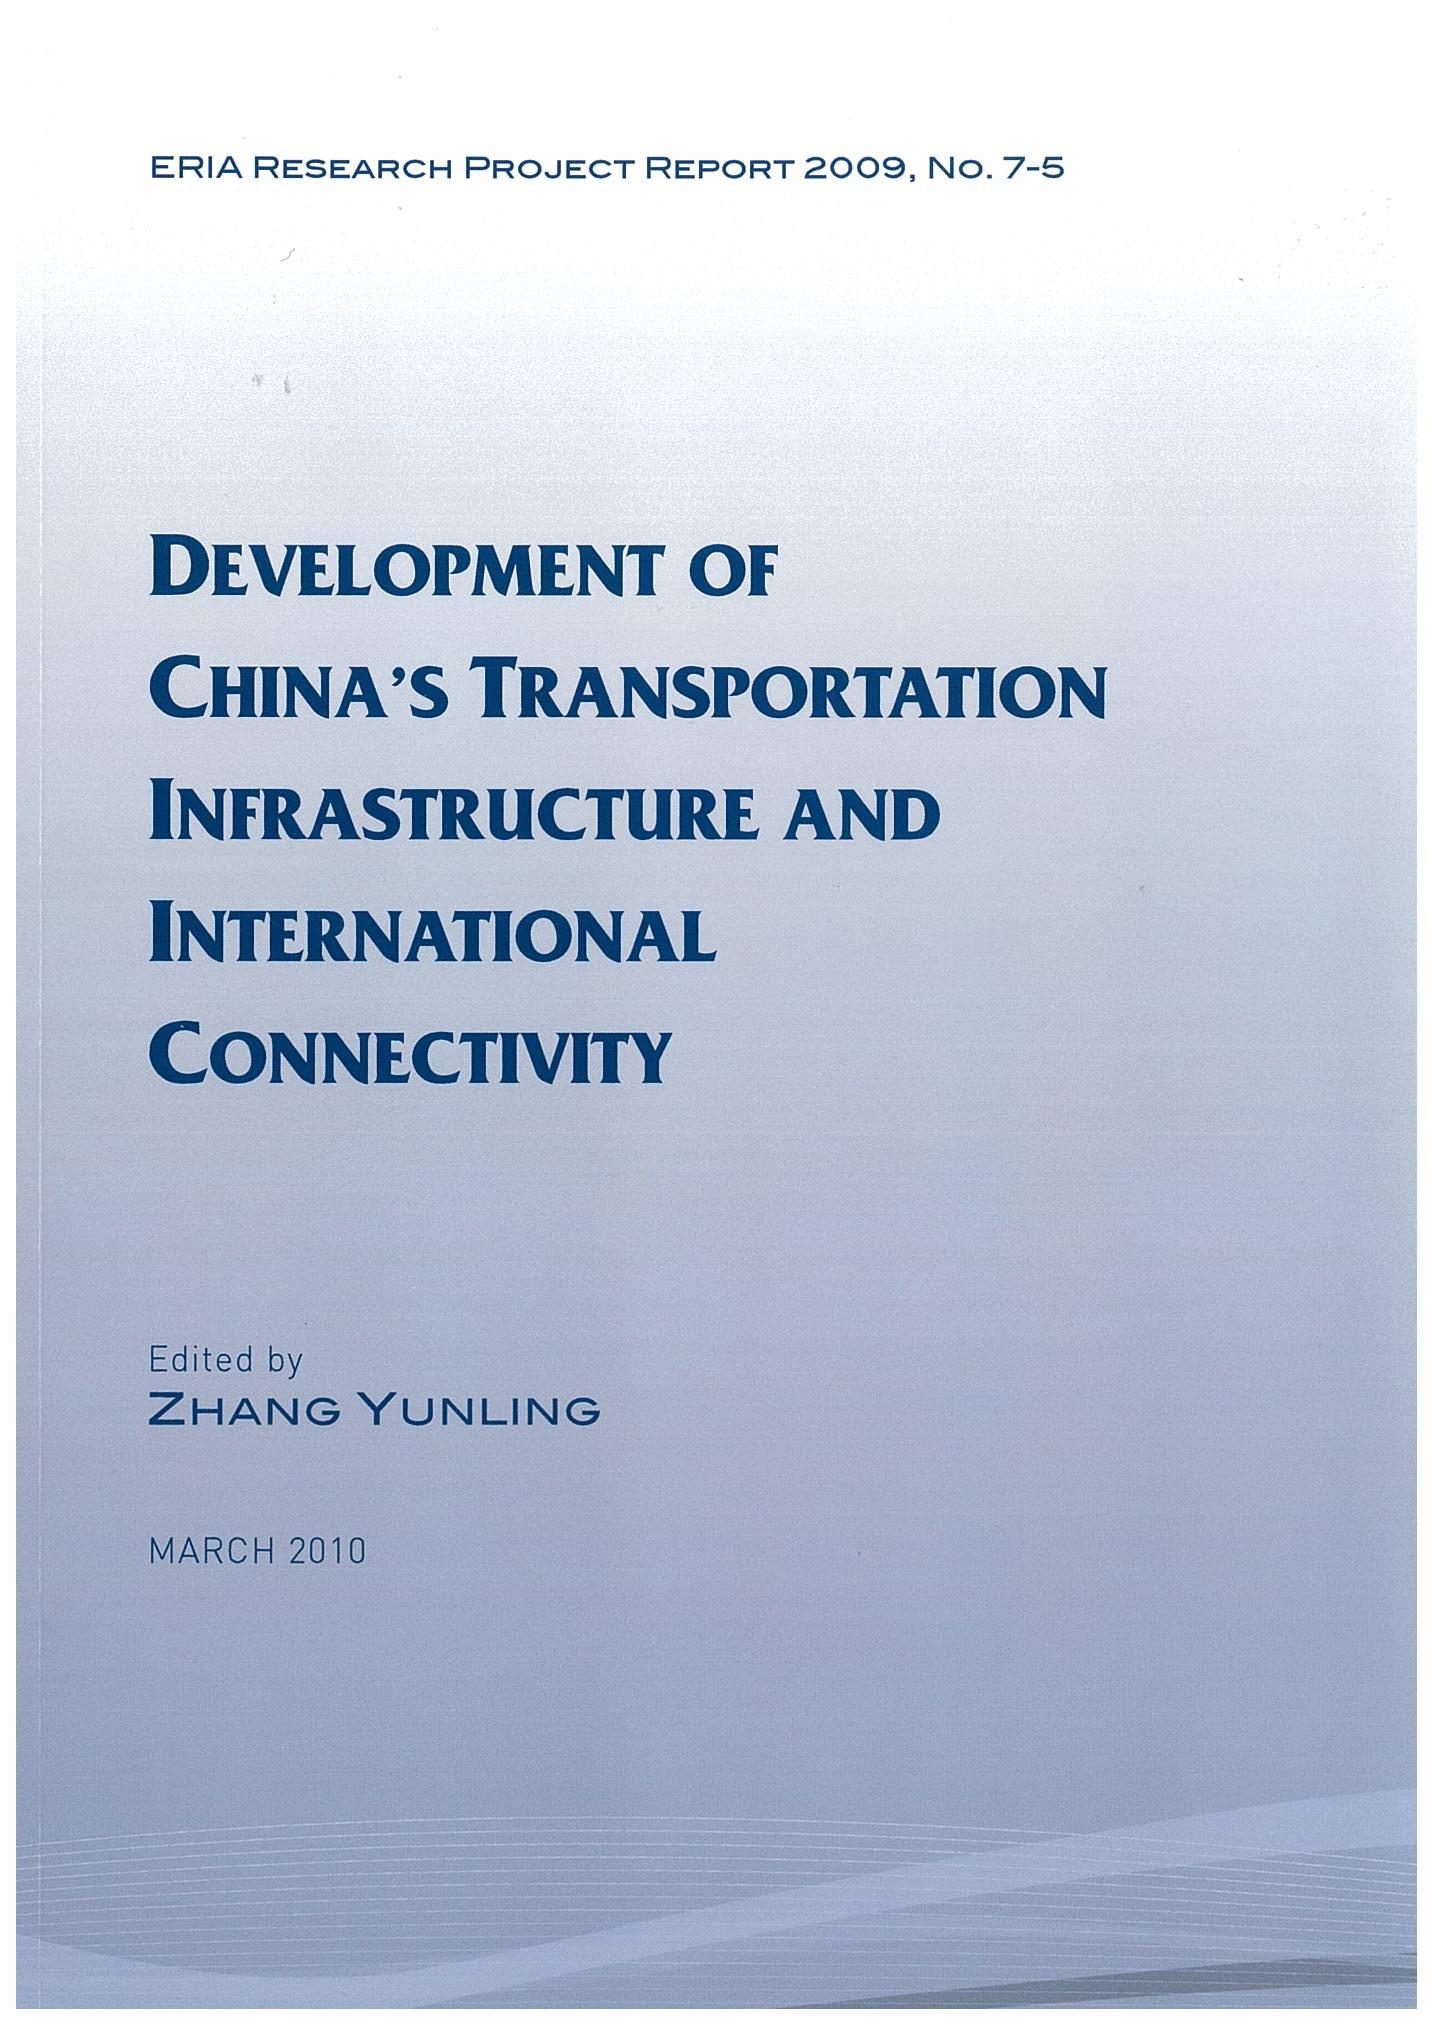 Development of China's Transportation Infrastructure and International Connectivity